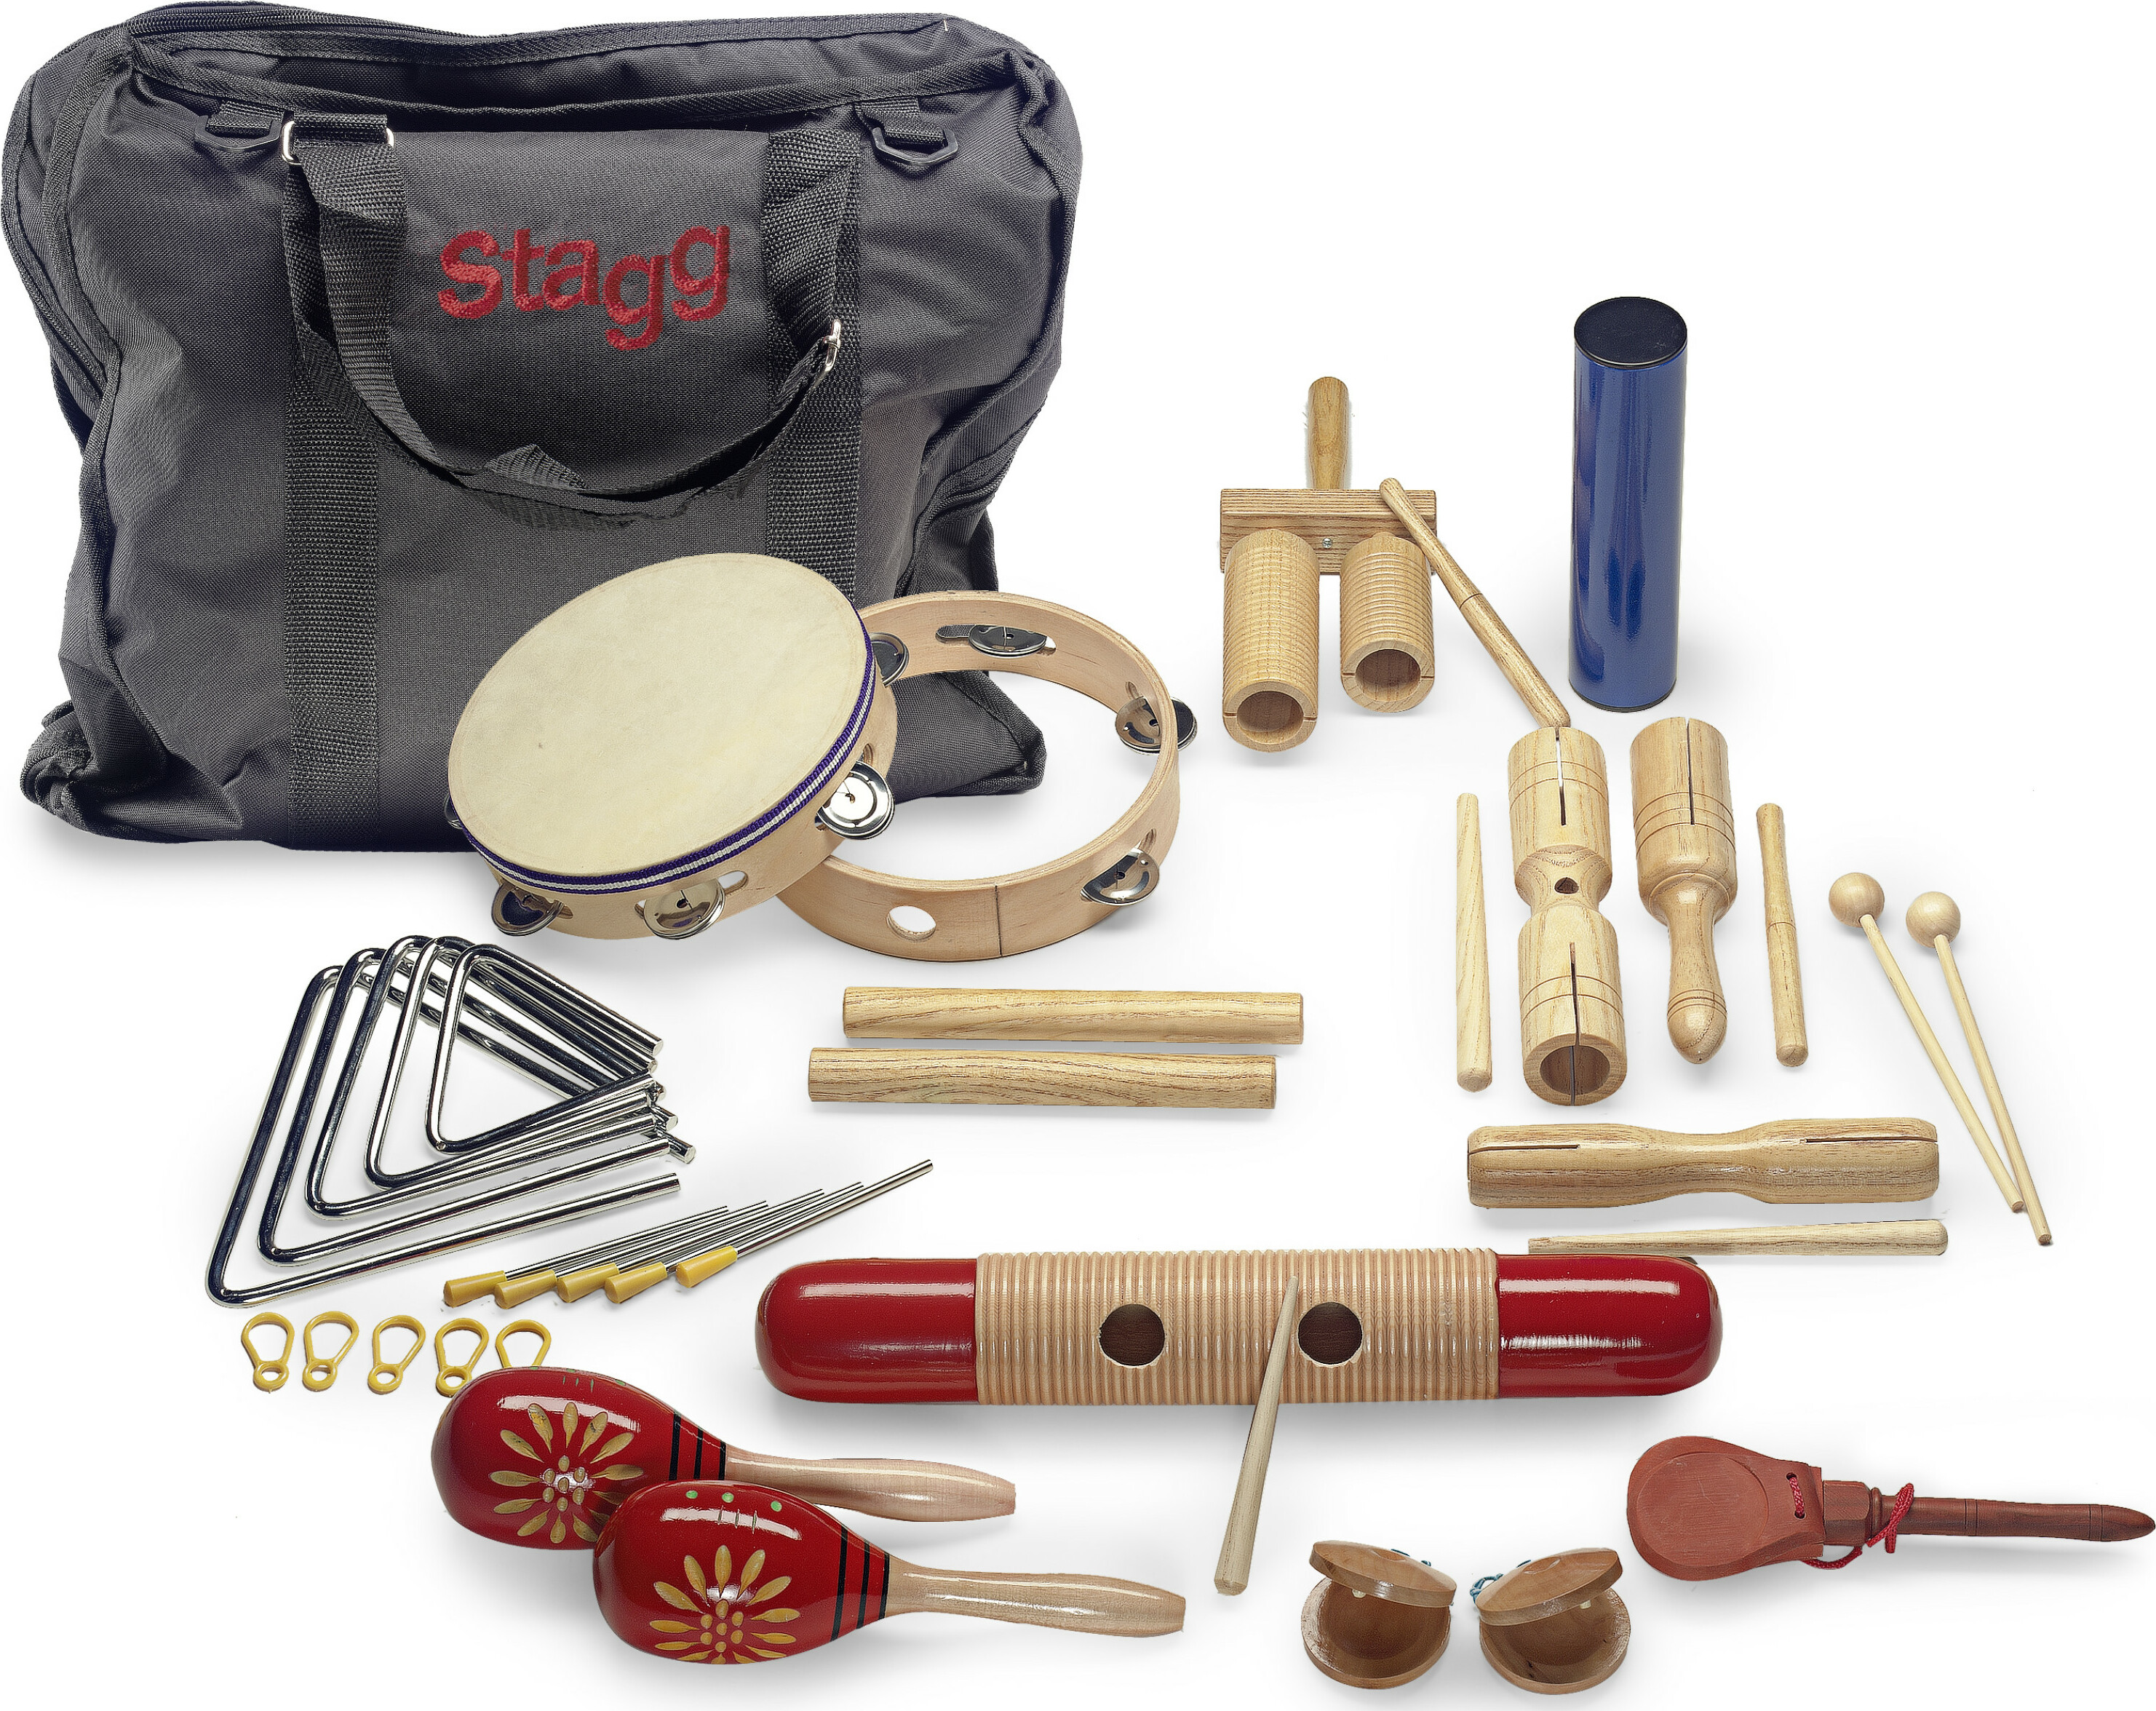 Stagg Kit De Percussion Junior Cpj-05 + Sac - Percussion set for kids - Main picture